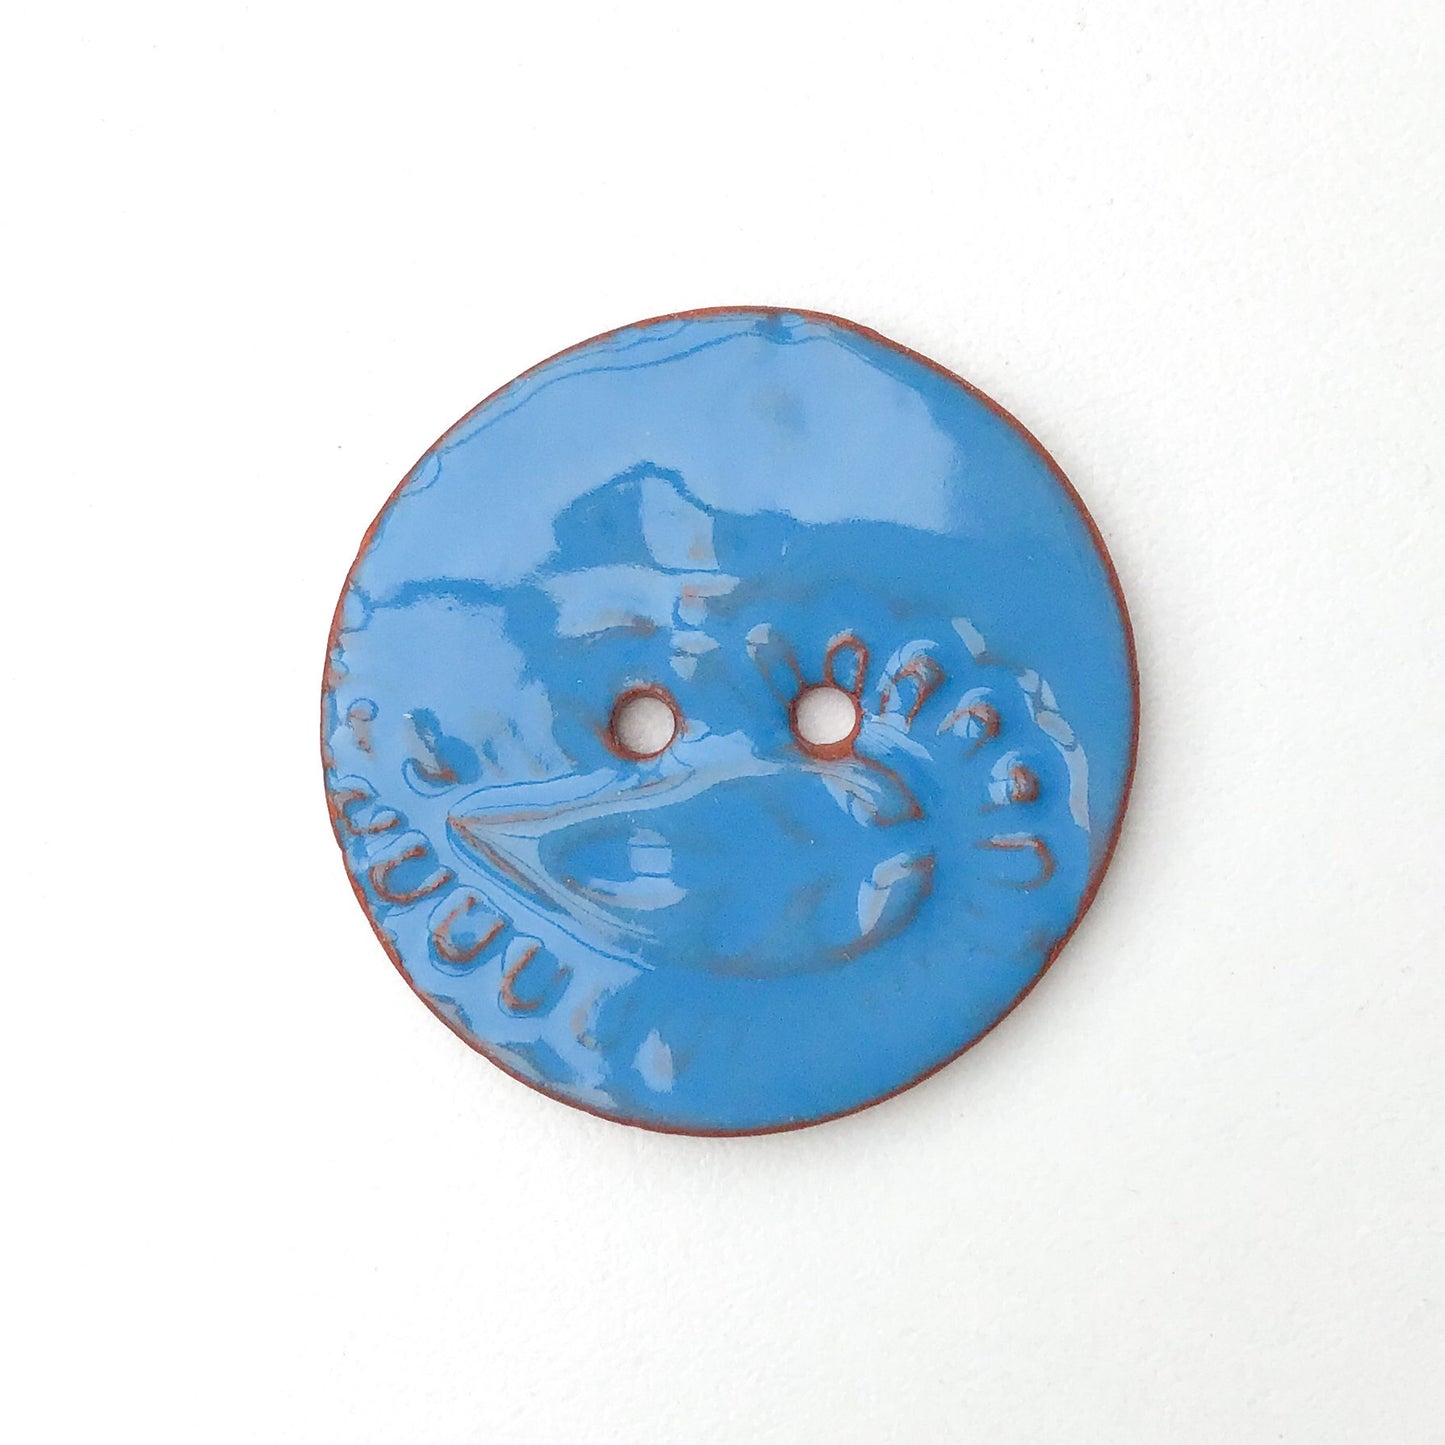 Hand Stamped  Ceramic Button - Pottery Art Button - 1 3/8"